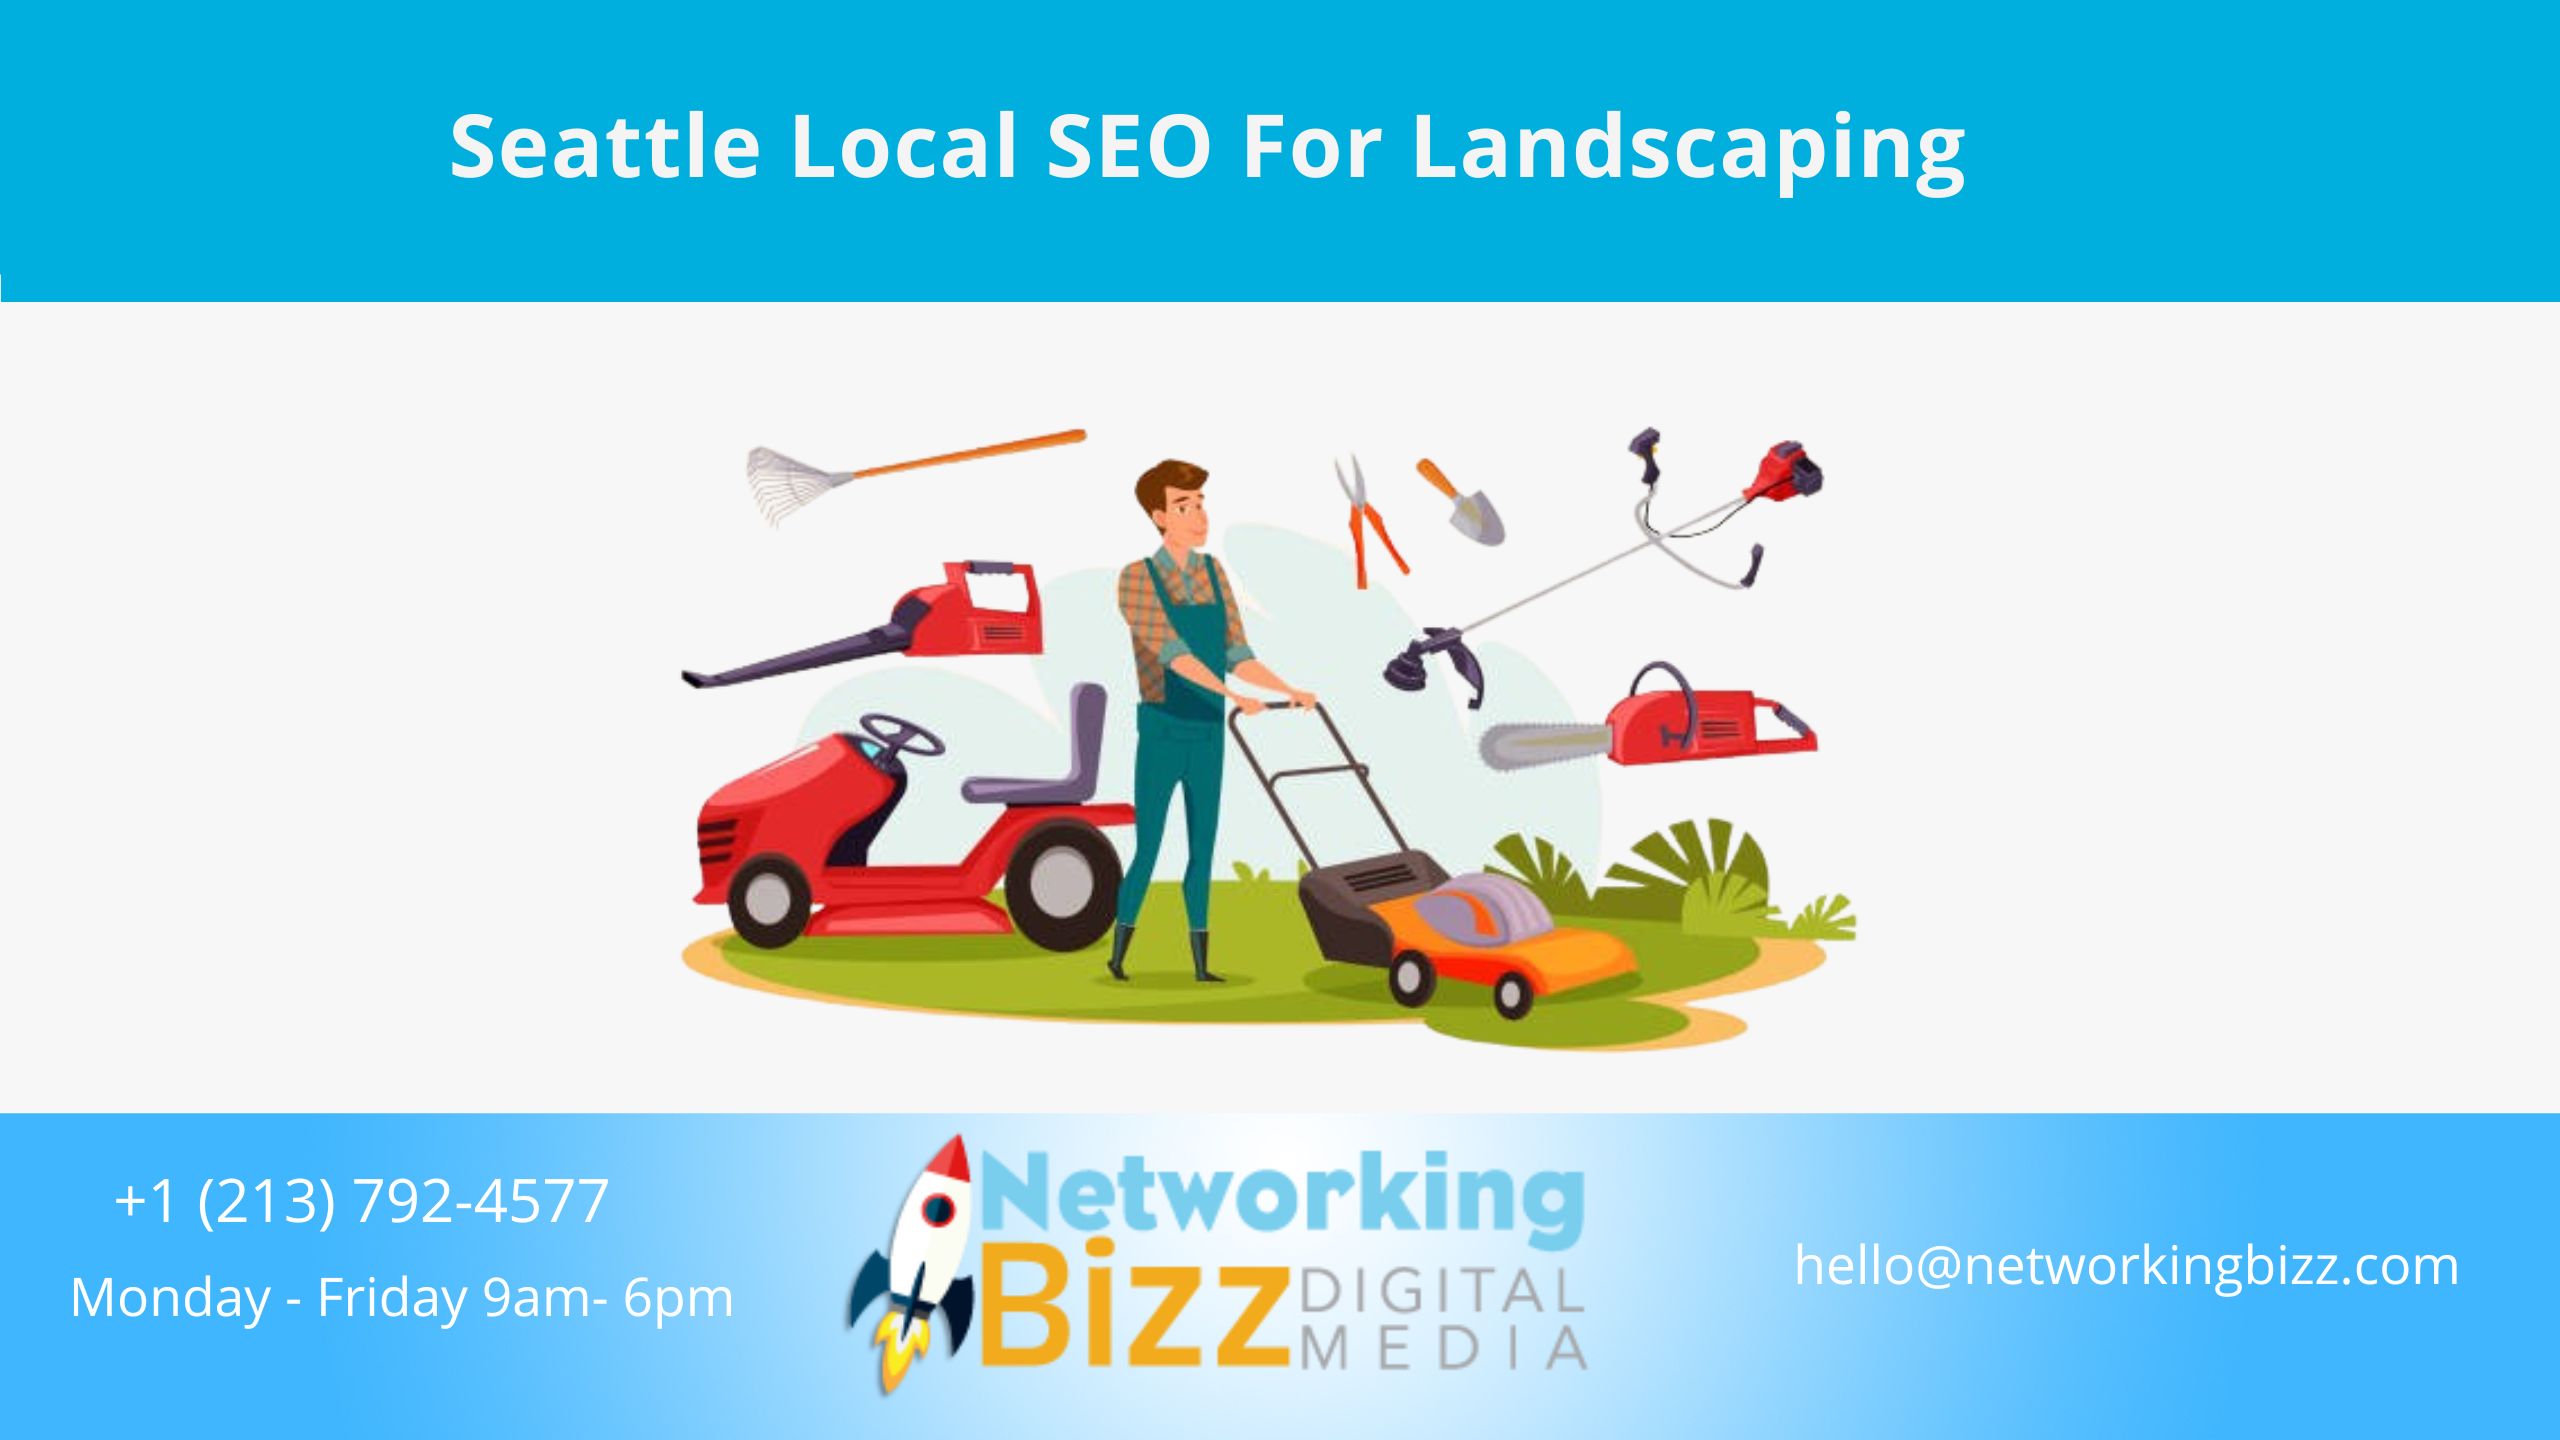 Seattle Local SEO For Landscaping